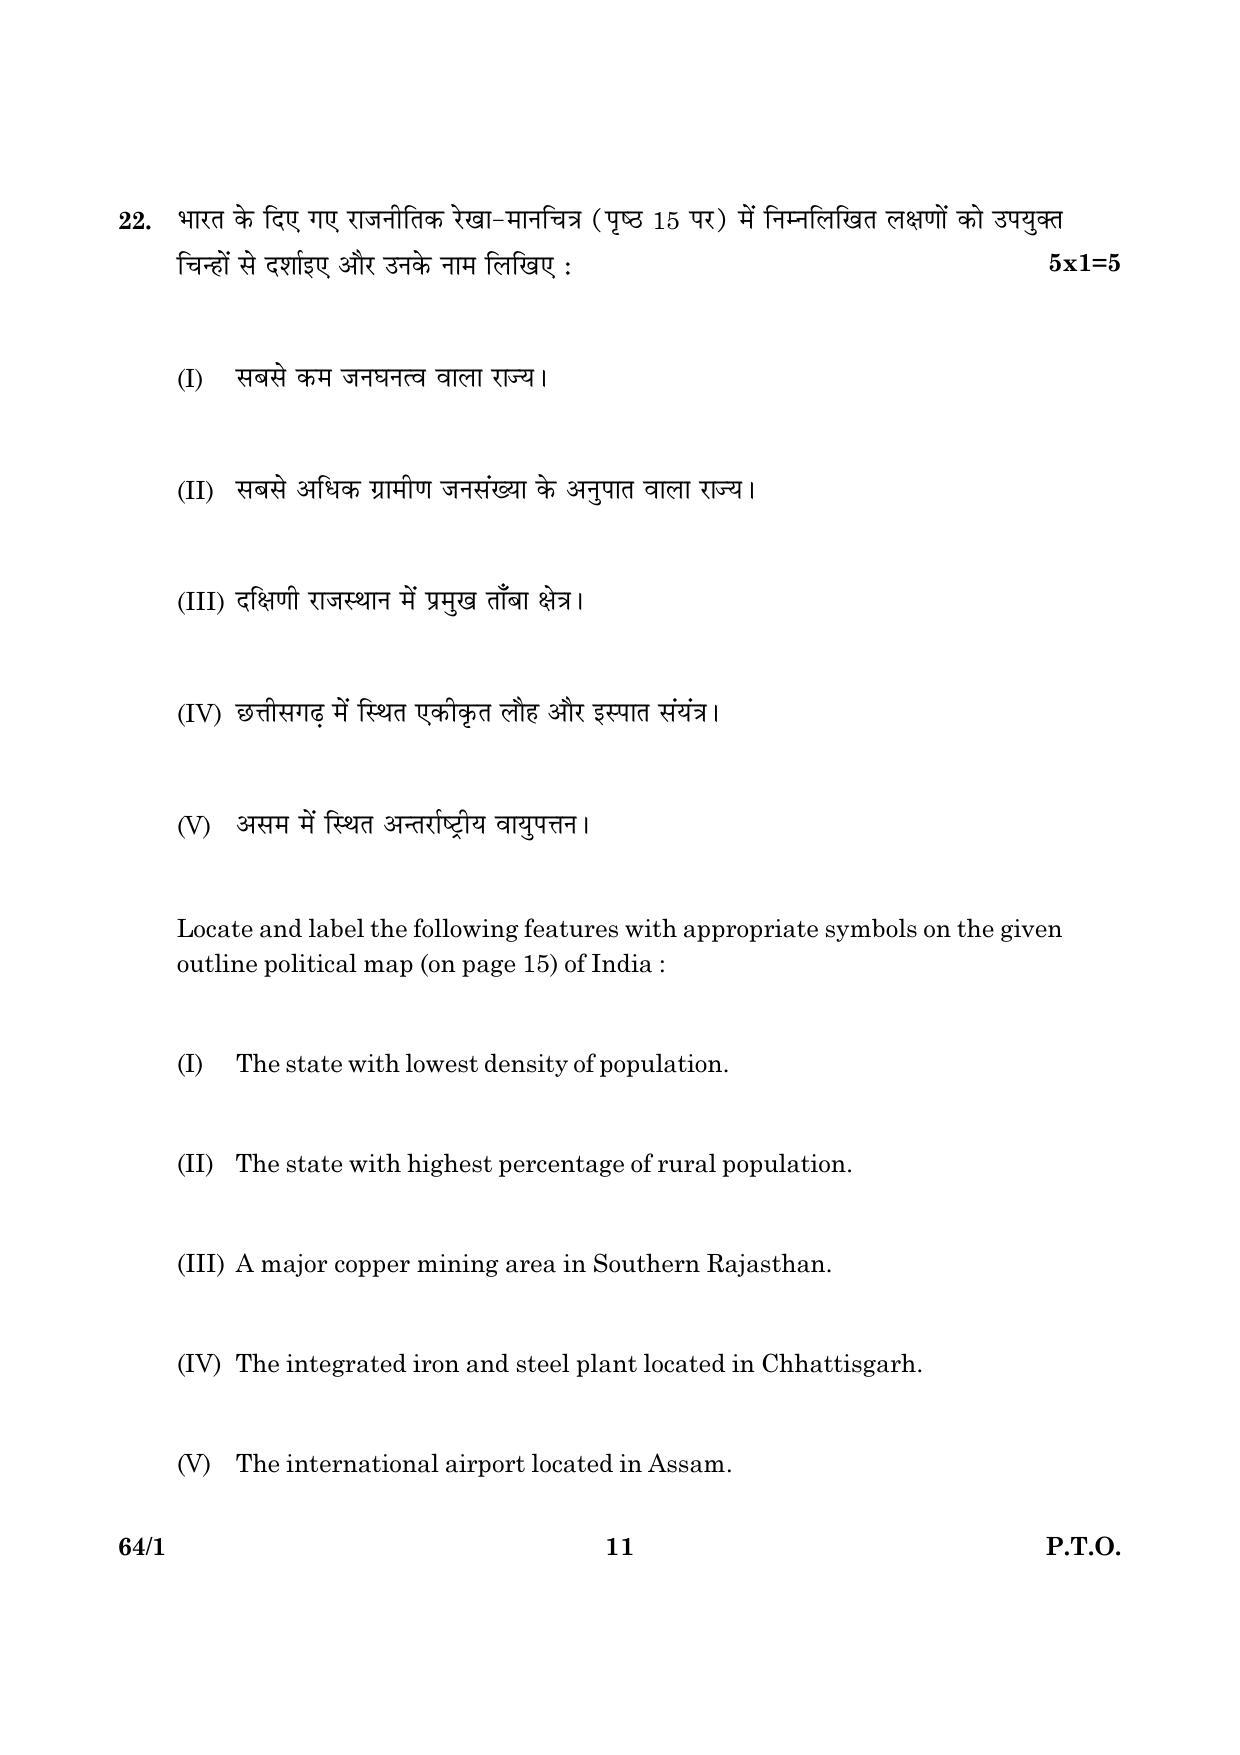 CBSE Class 12 064 Set 1 Geography 2016 Question Paper - Page 11